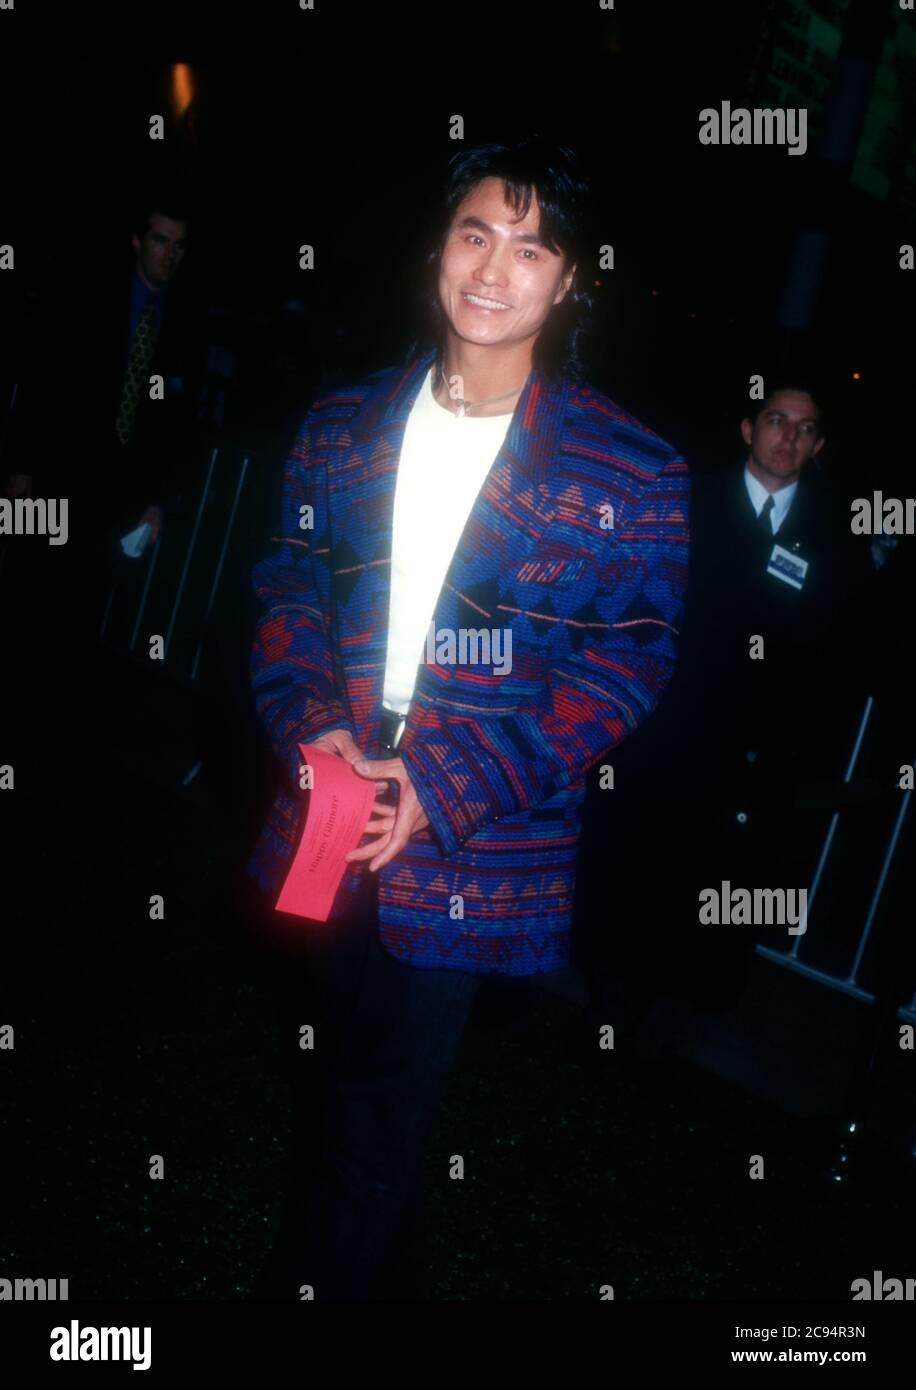 Century City, California, USA 7th February 1996 Actor Robin Shou attends Universal Pictures 'Happy Gilmore' Premiere on February 7, 1996 at Cineplex Odeon Century Plaza Cinemas in Century City, California, USA. Photo by Barry King/Alamy Stock Photo Stock Photo